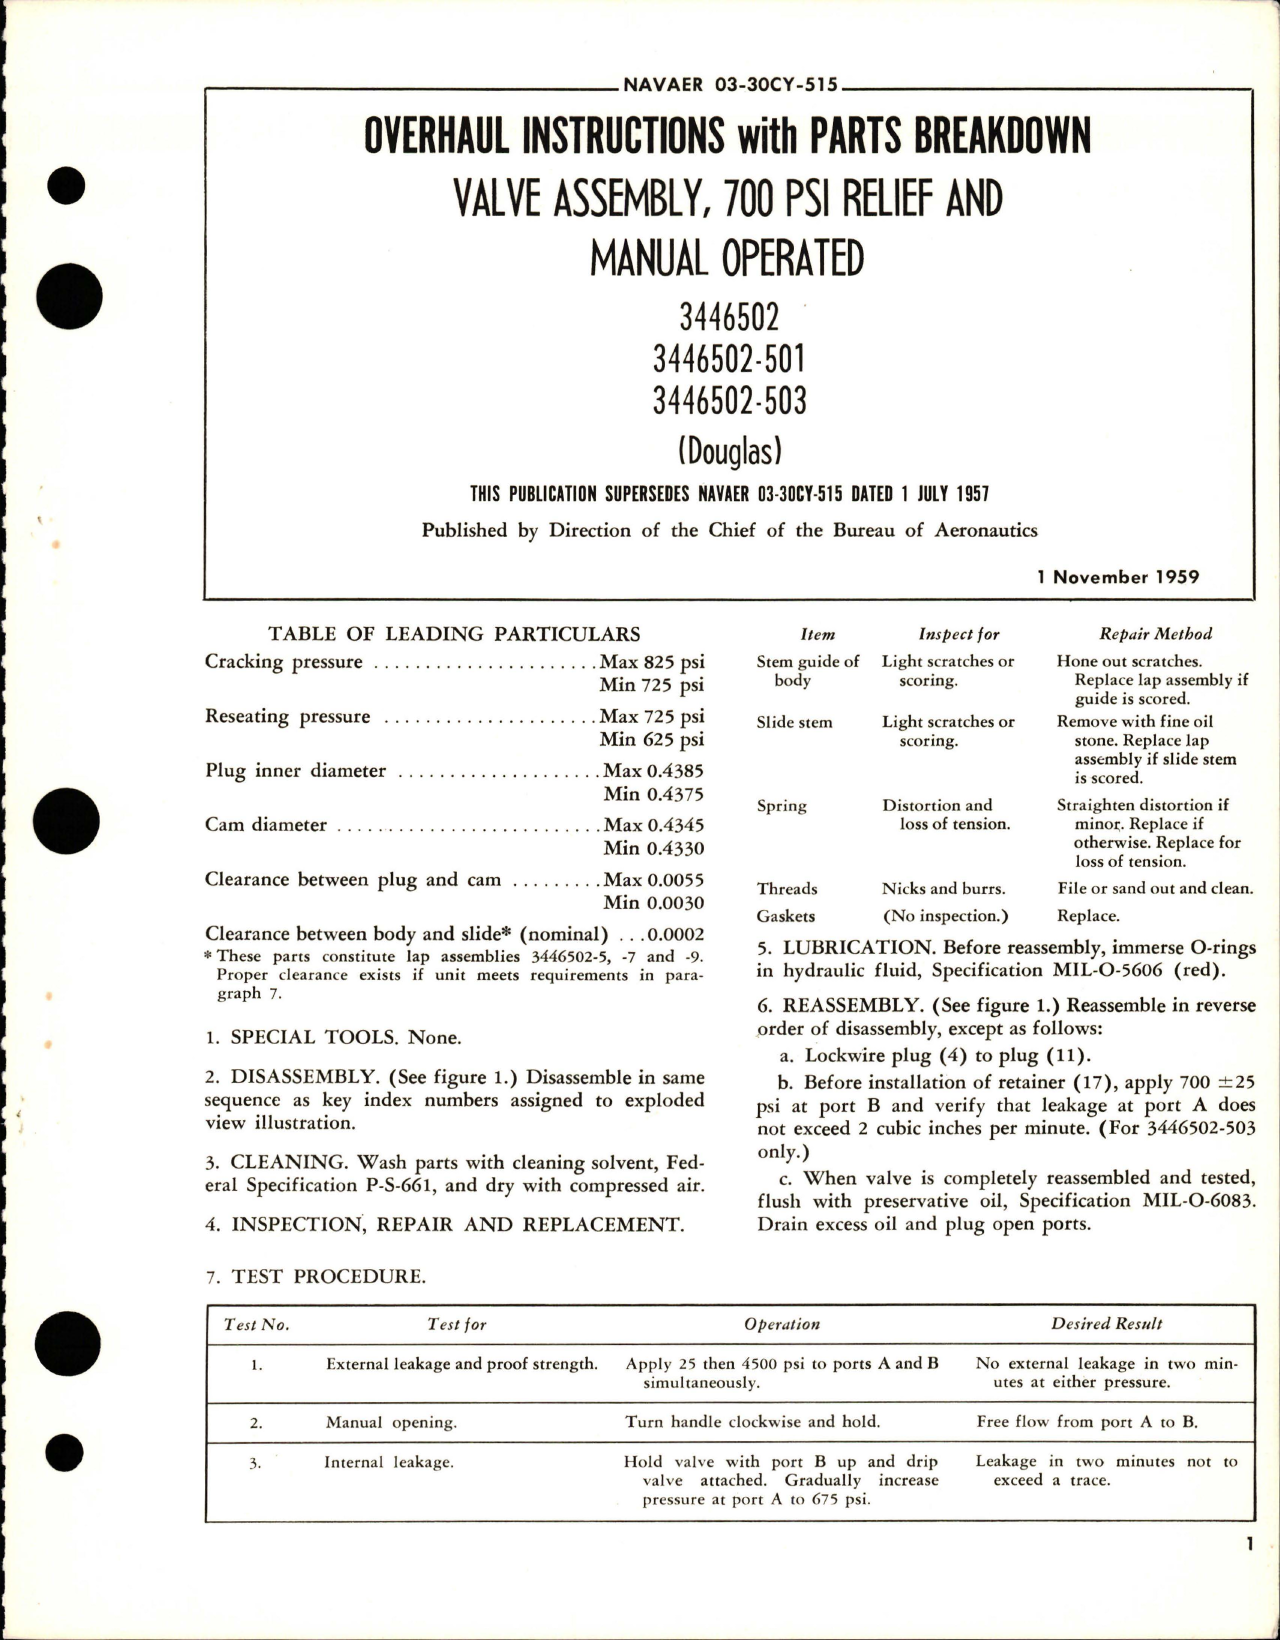 Sample page 1 from AirCorps Library document: Overhaul Instructions with Parts for 700 PSI Relief and Manual Operated Valve Assembly